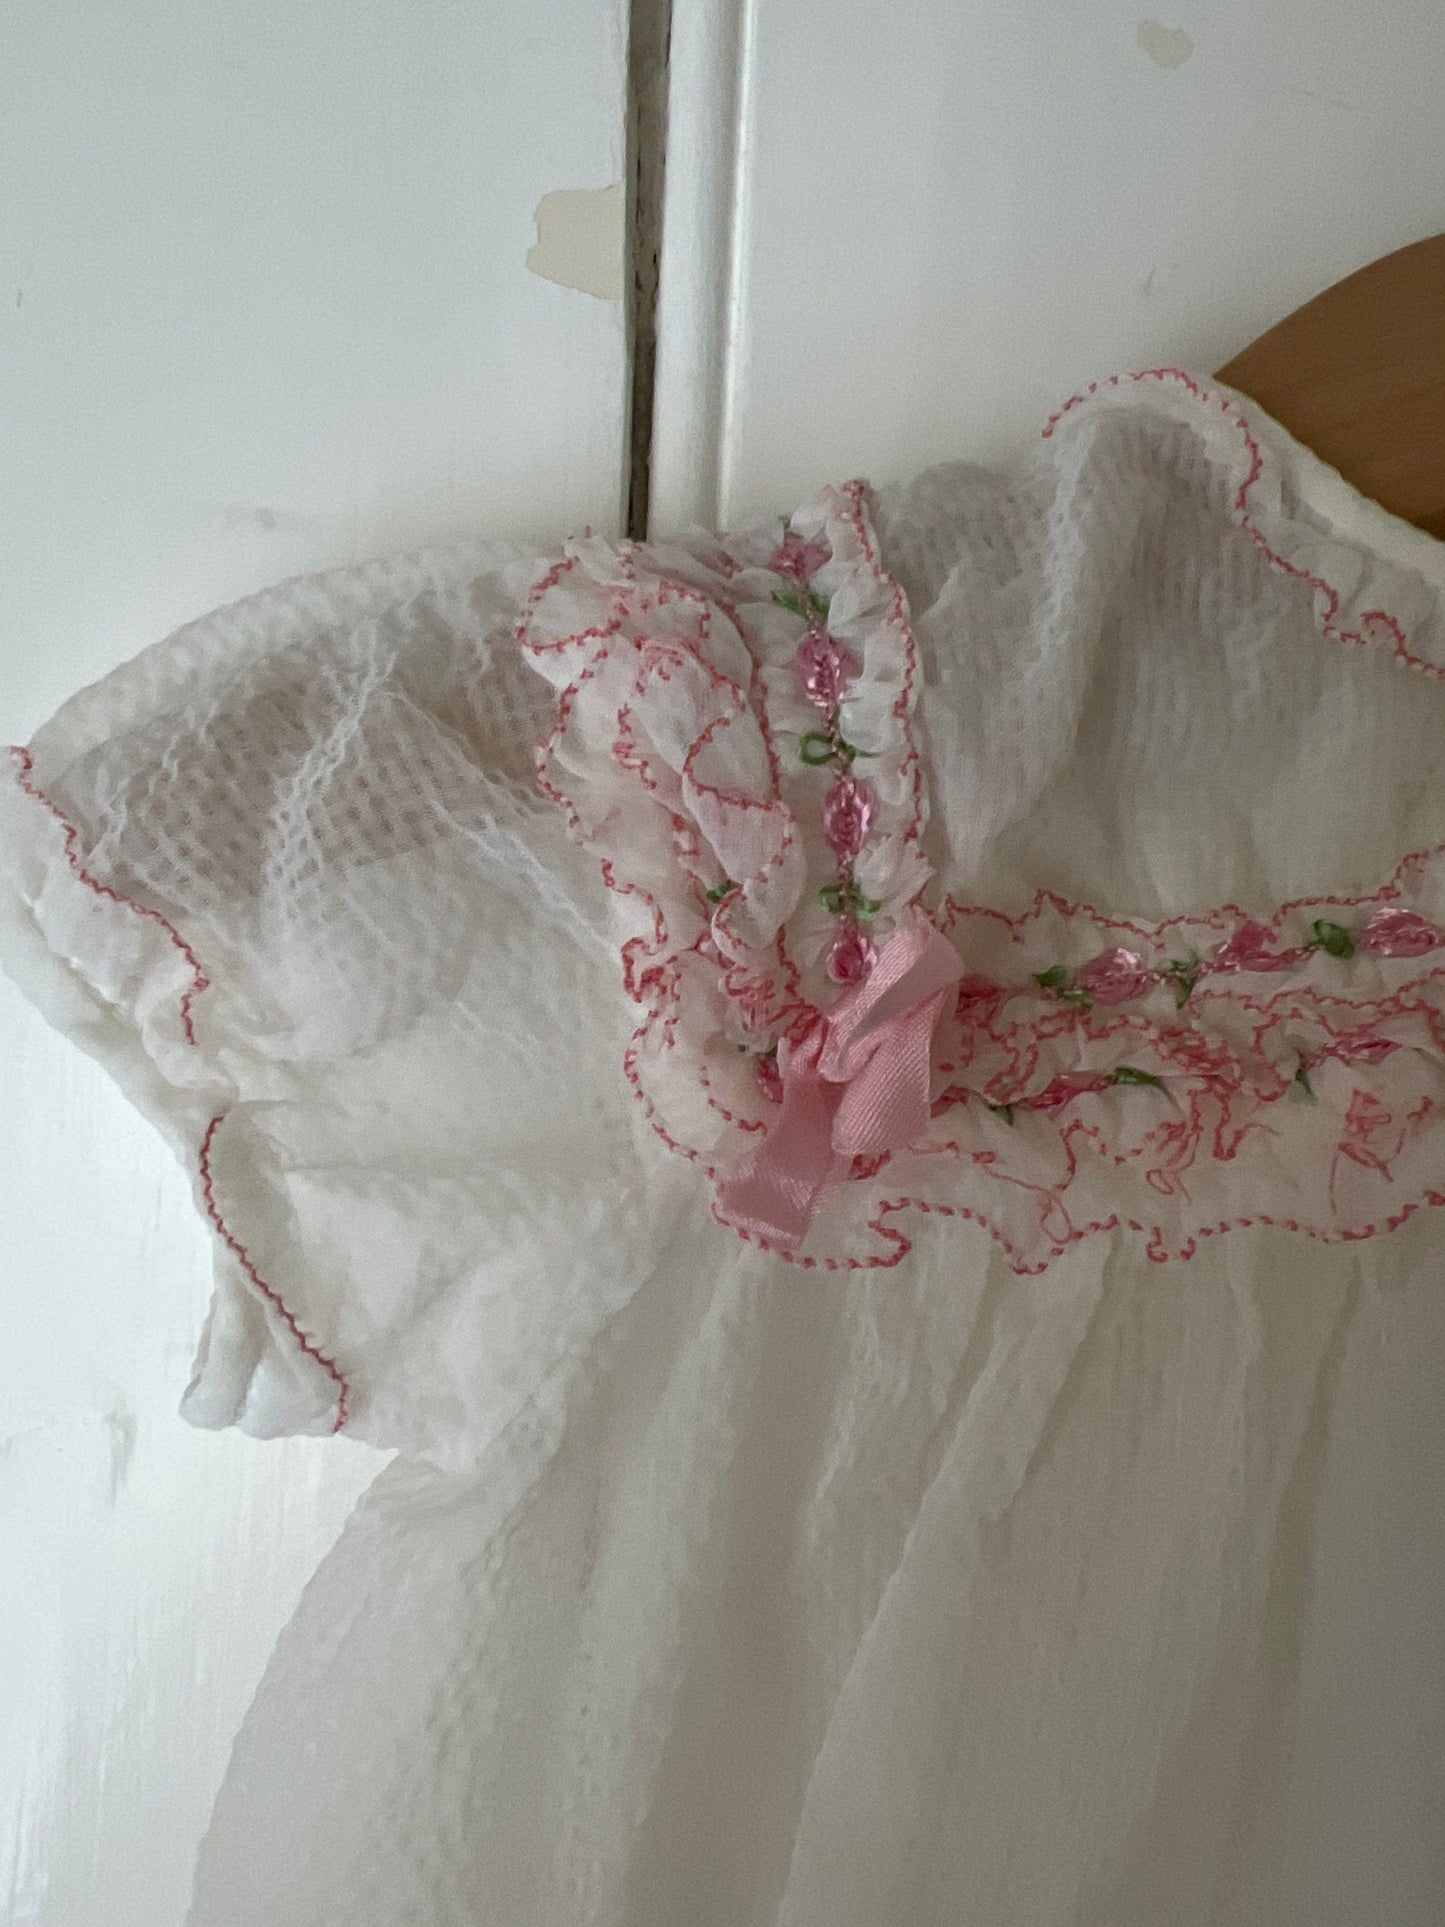 Vintage Girls Dress - white and pink terylene Dress Baby Dress age 2-3 years